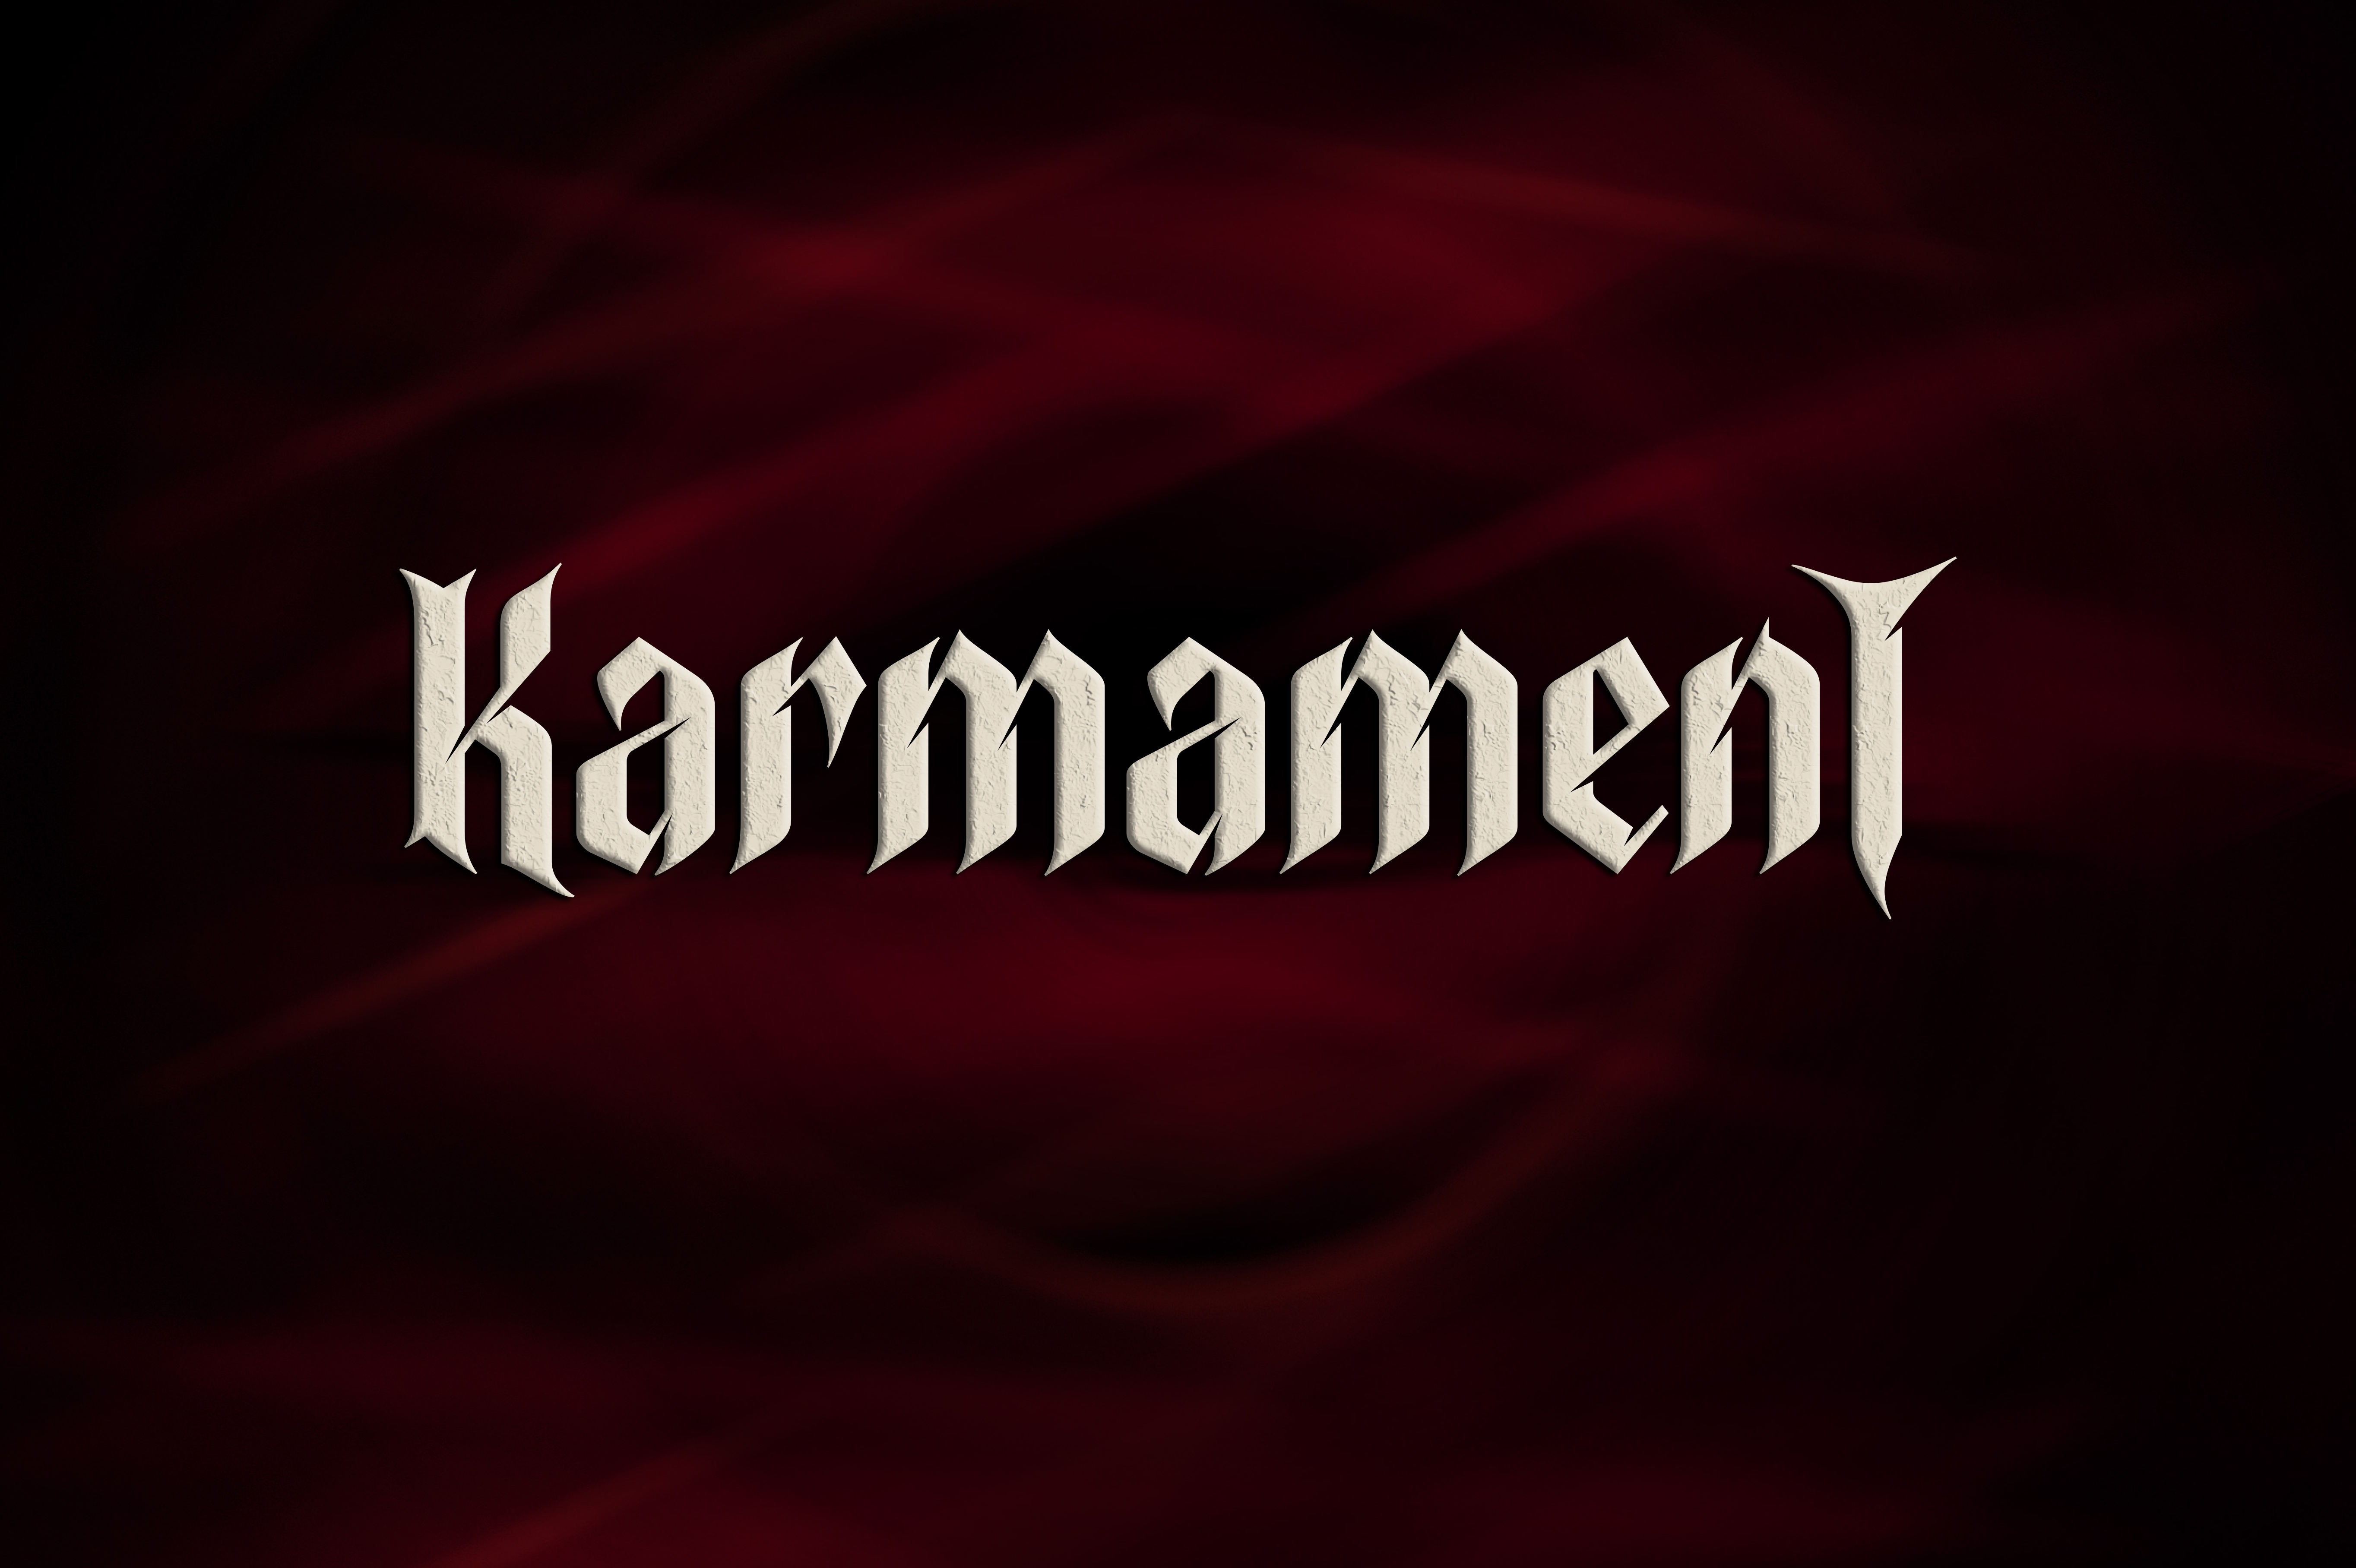 White Karmament Logo in front of a black and red background